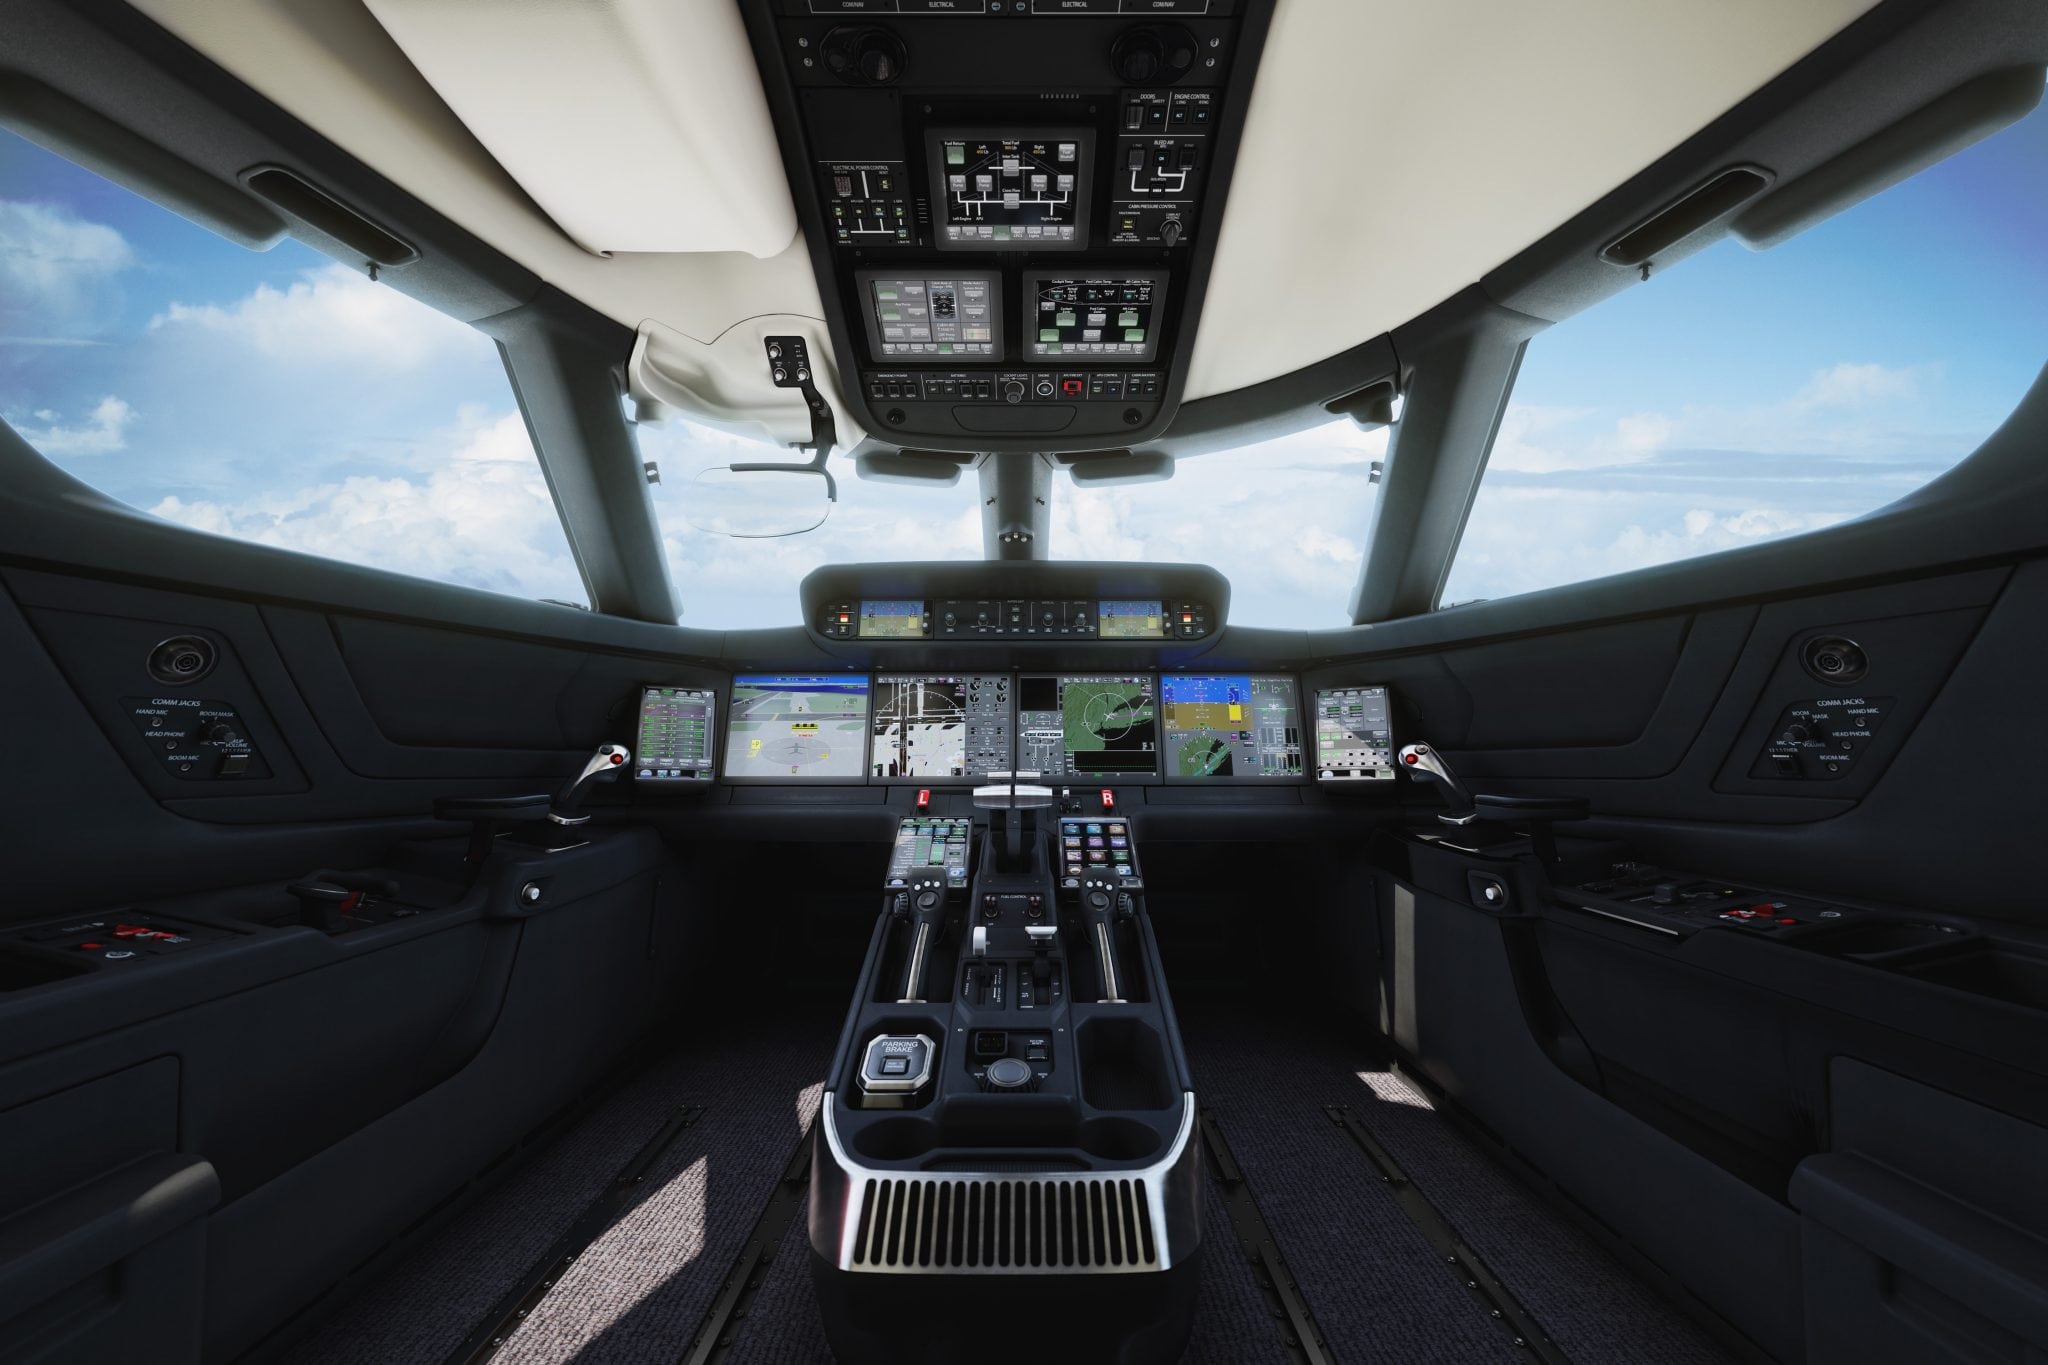 Flight deck of Gulfstream G500 equipped with Honeywell SmartView SVS and touchscreen technologies, among others